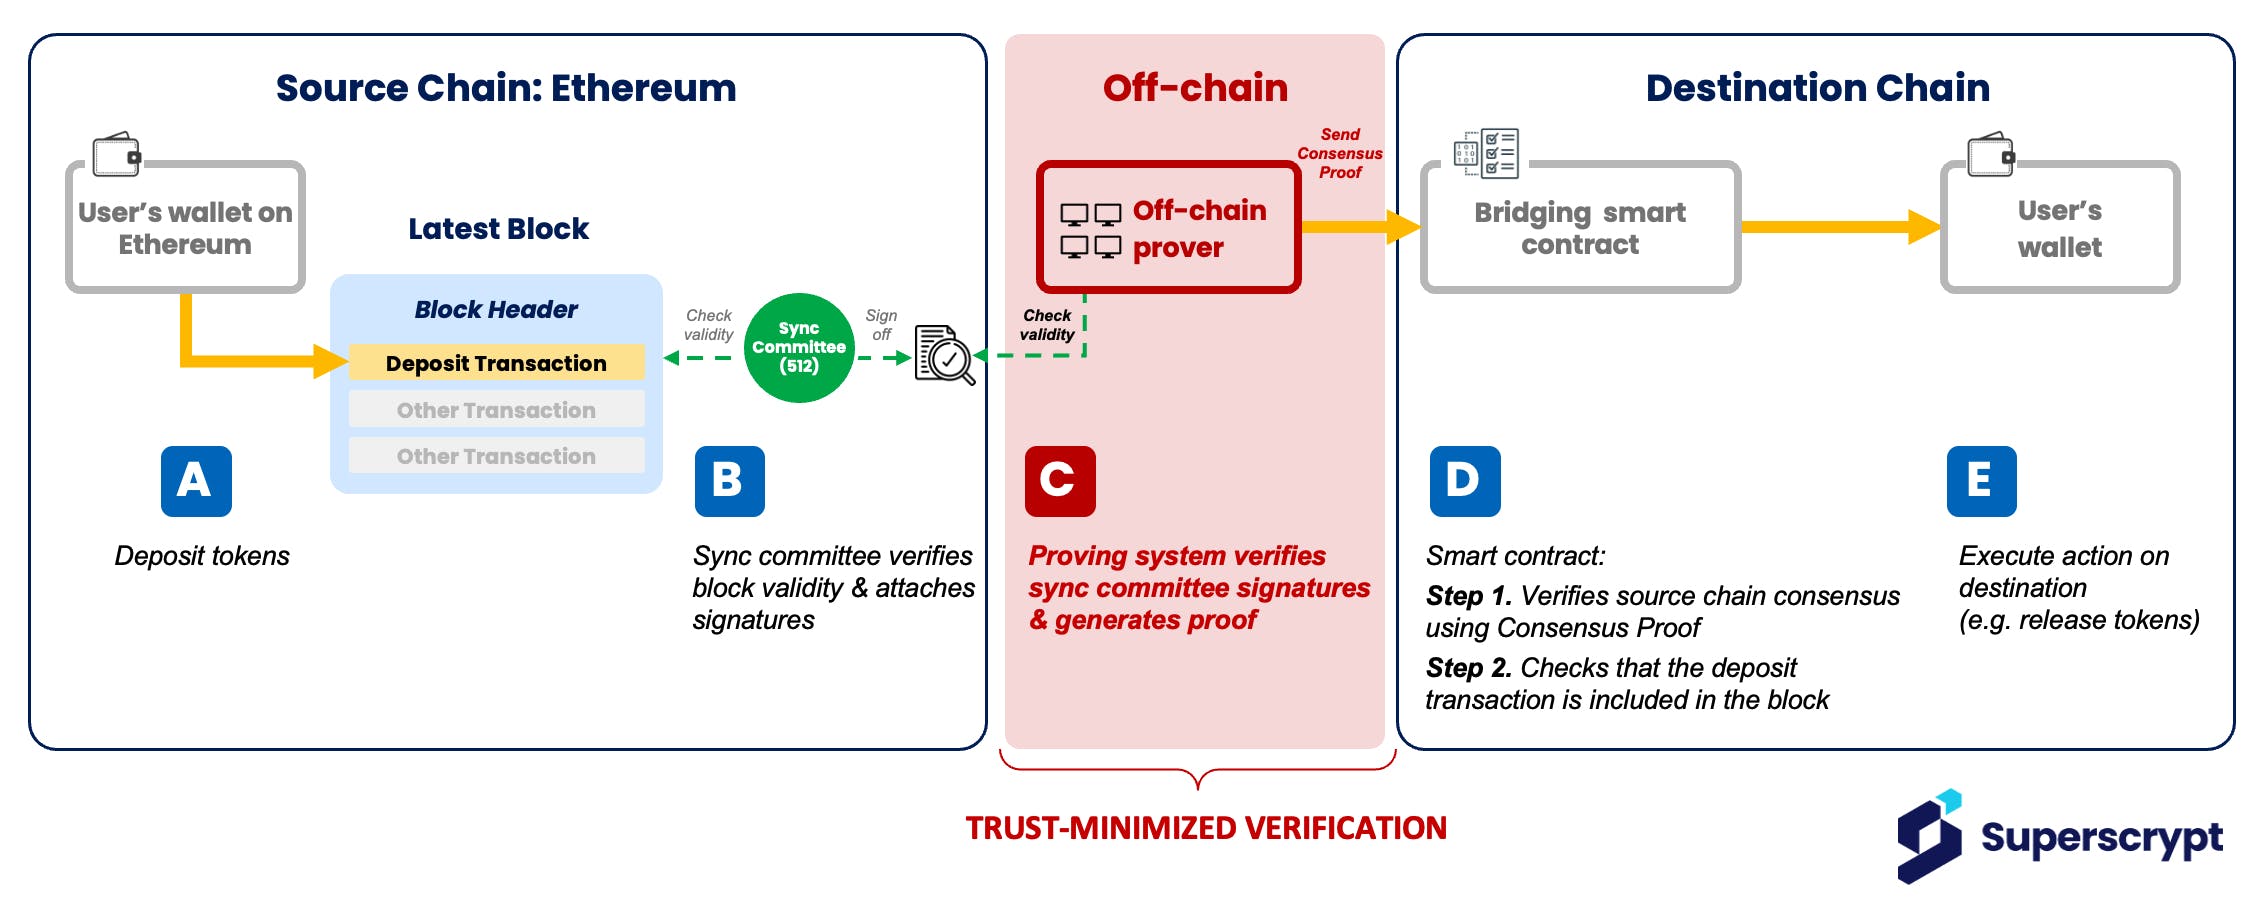 Verification with zk proofs allows us to move closer to trust-minimized bridging